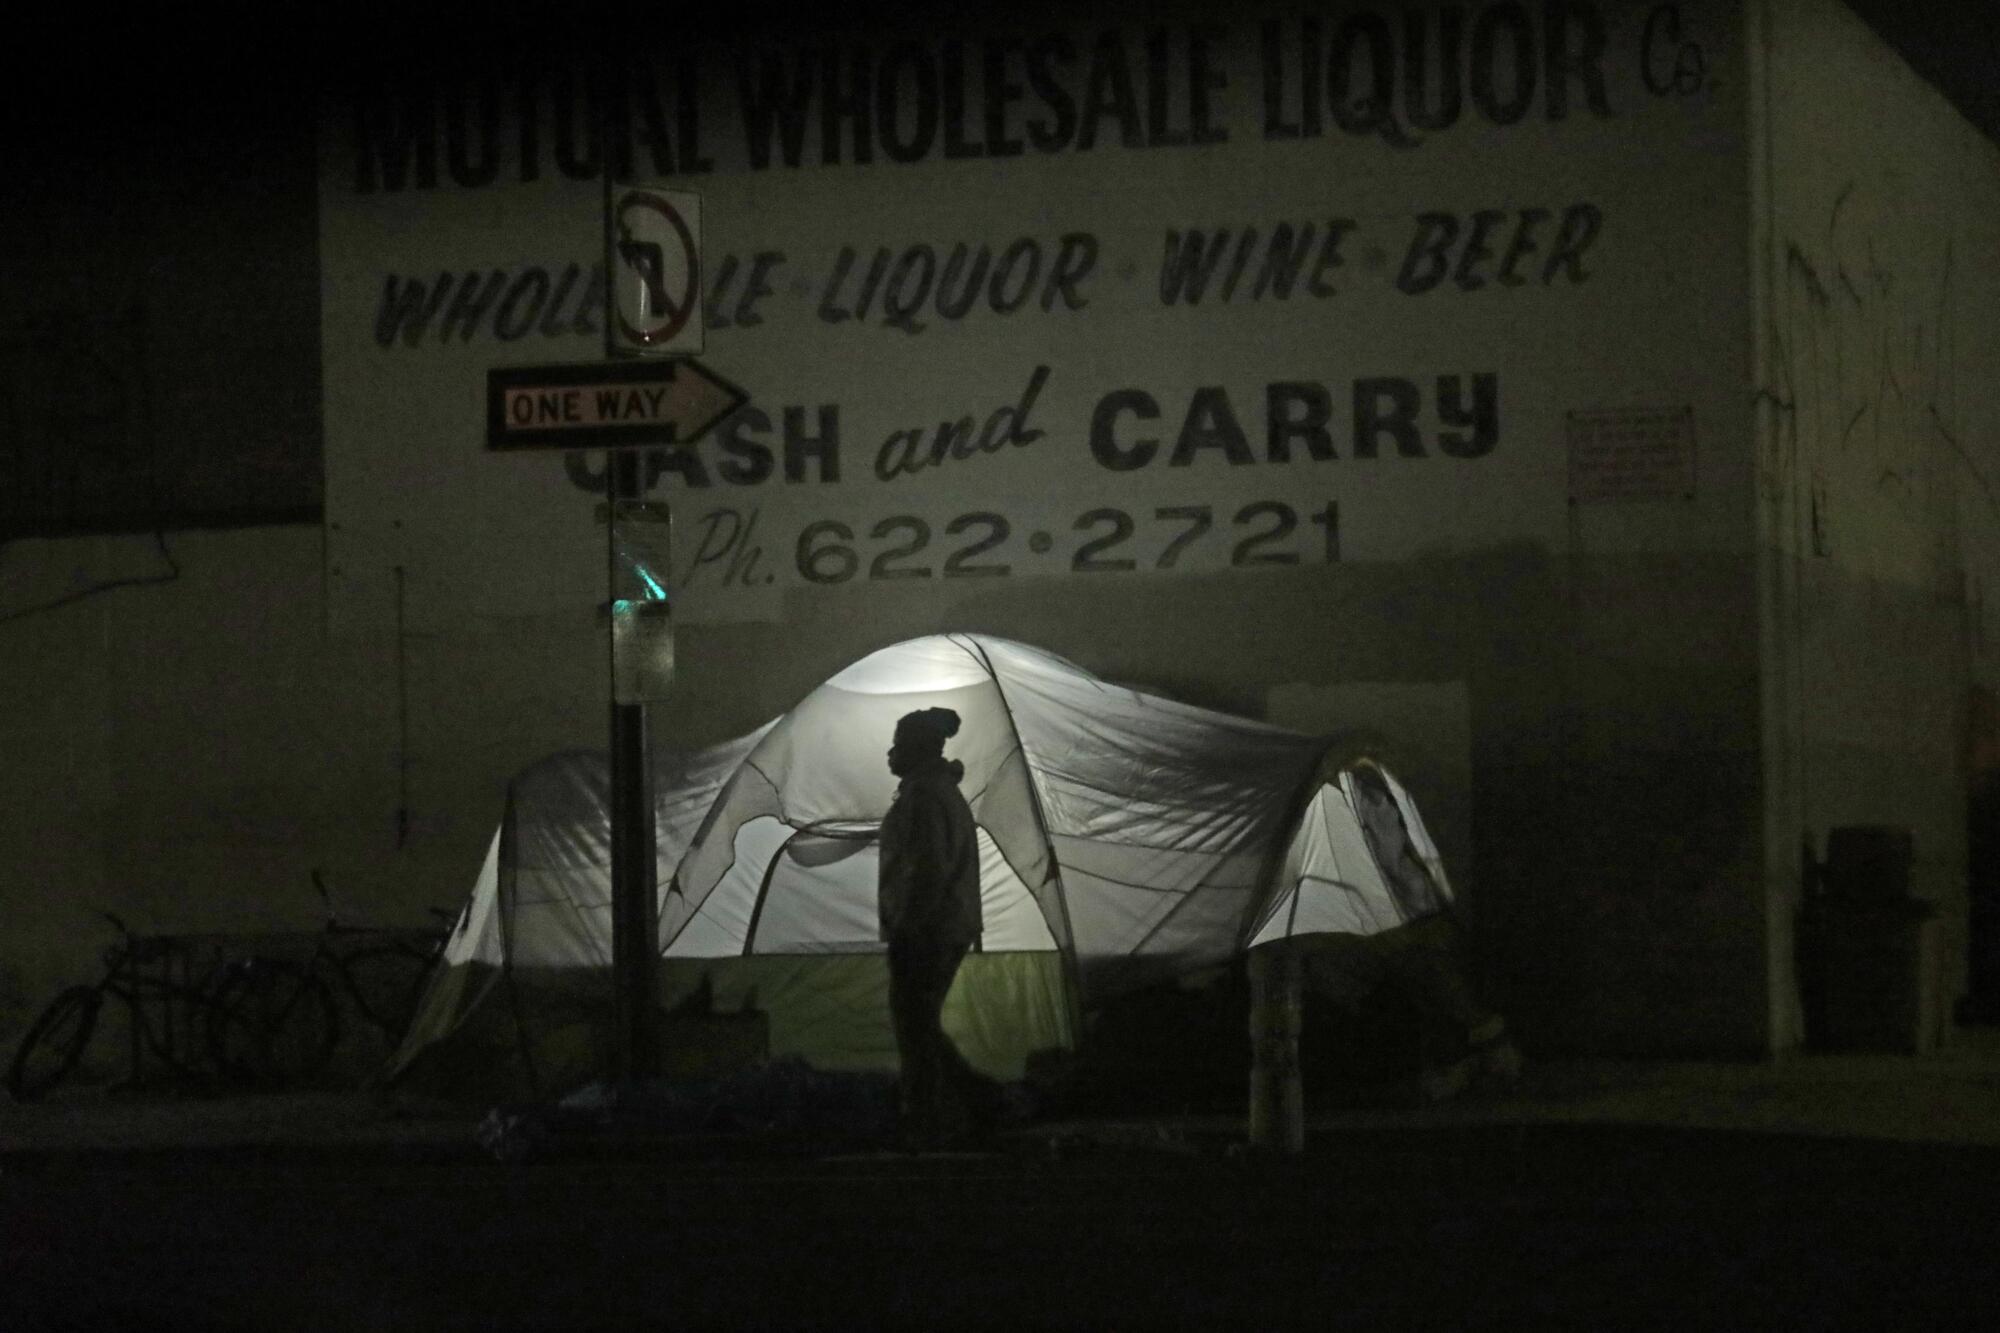 A man walks past an illuminated tent used by a homeless couple on a sidewalk.